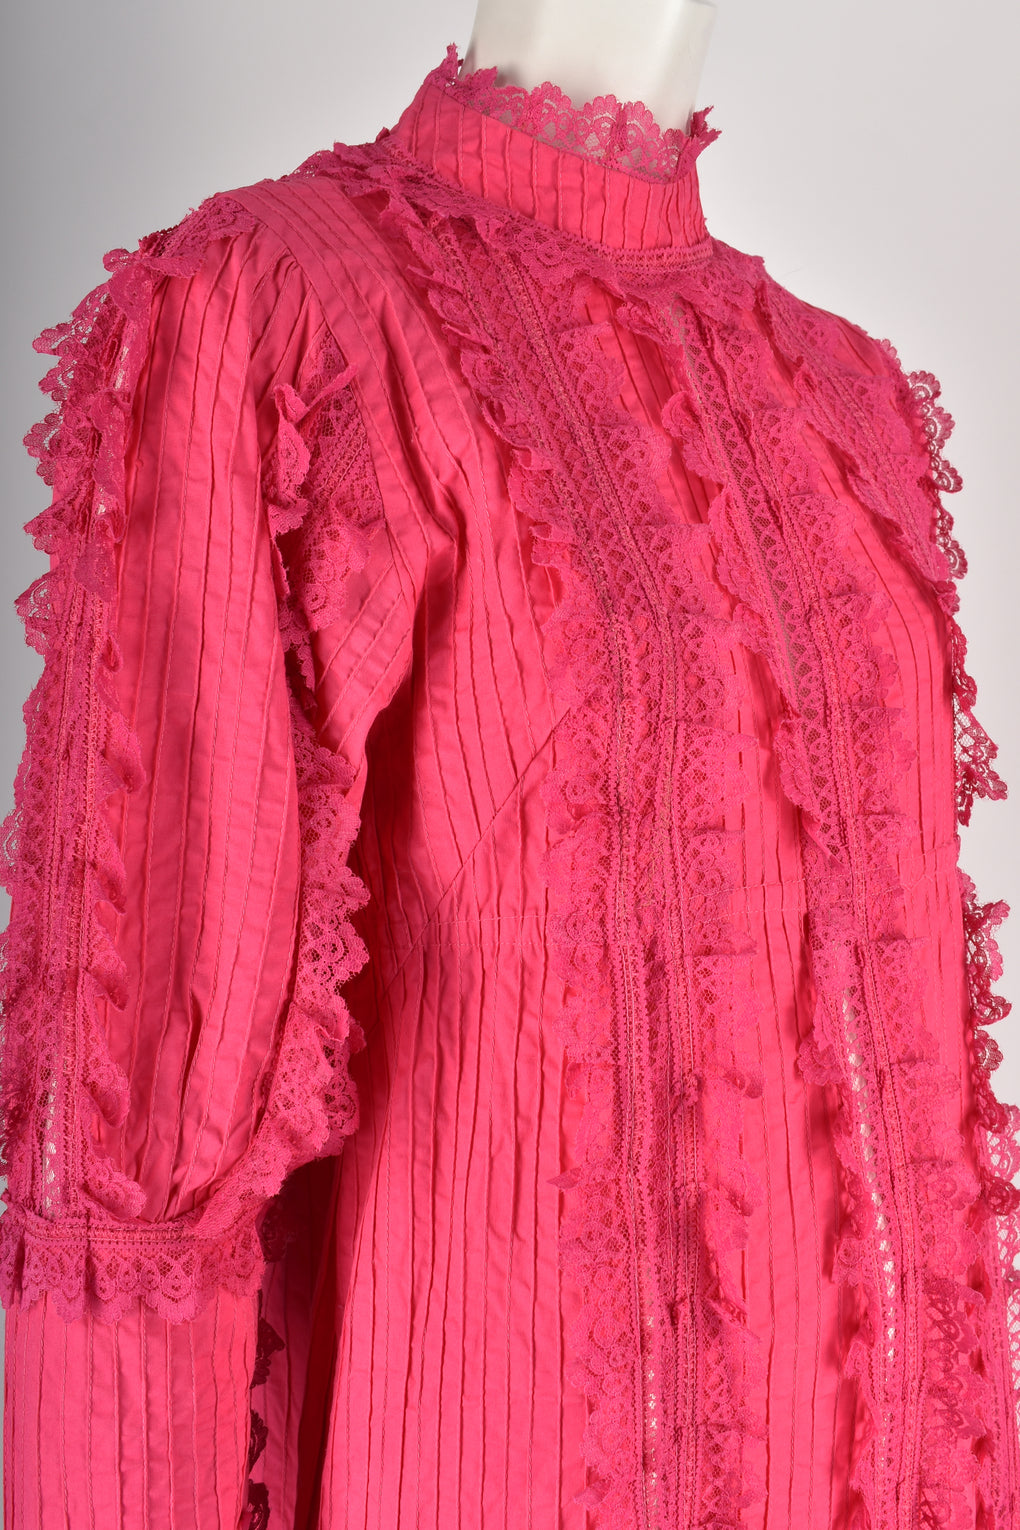 VINTAGE 70s bright pink Mexican dress L